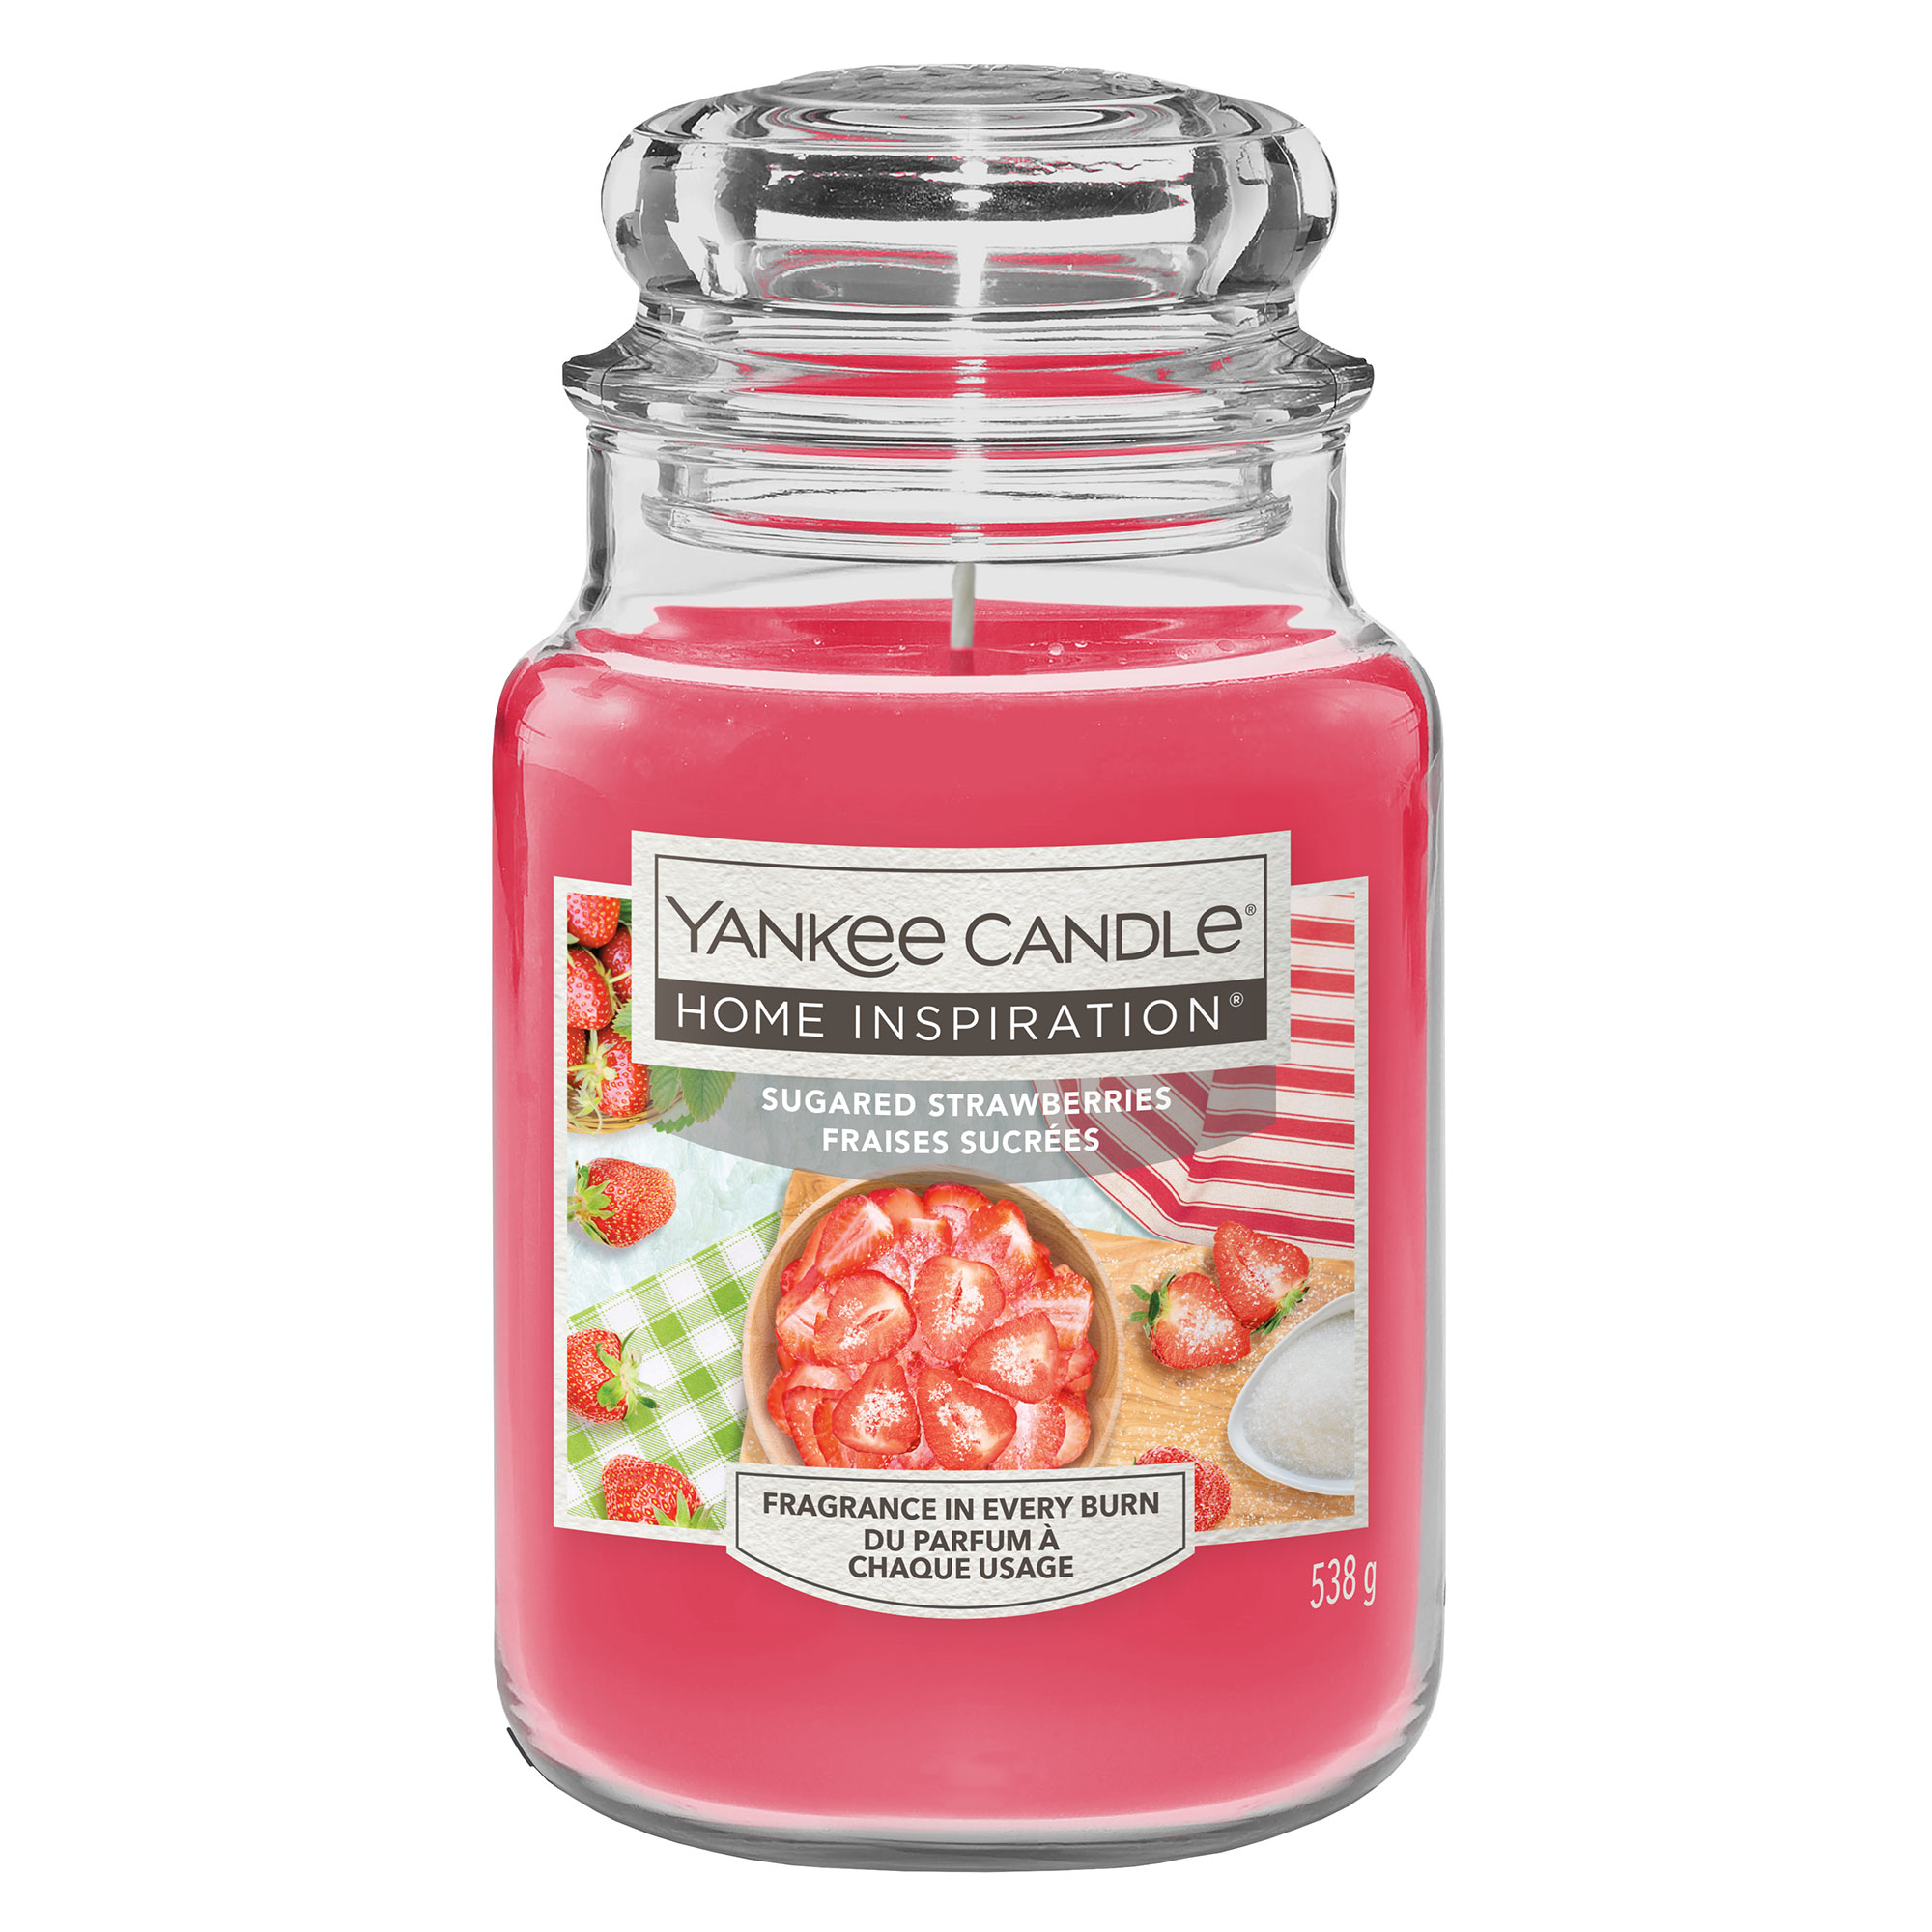 Yankee Candle Home Inspiration Sugared Strawberries Large Jar